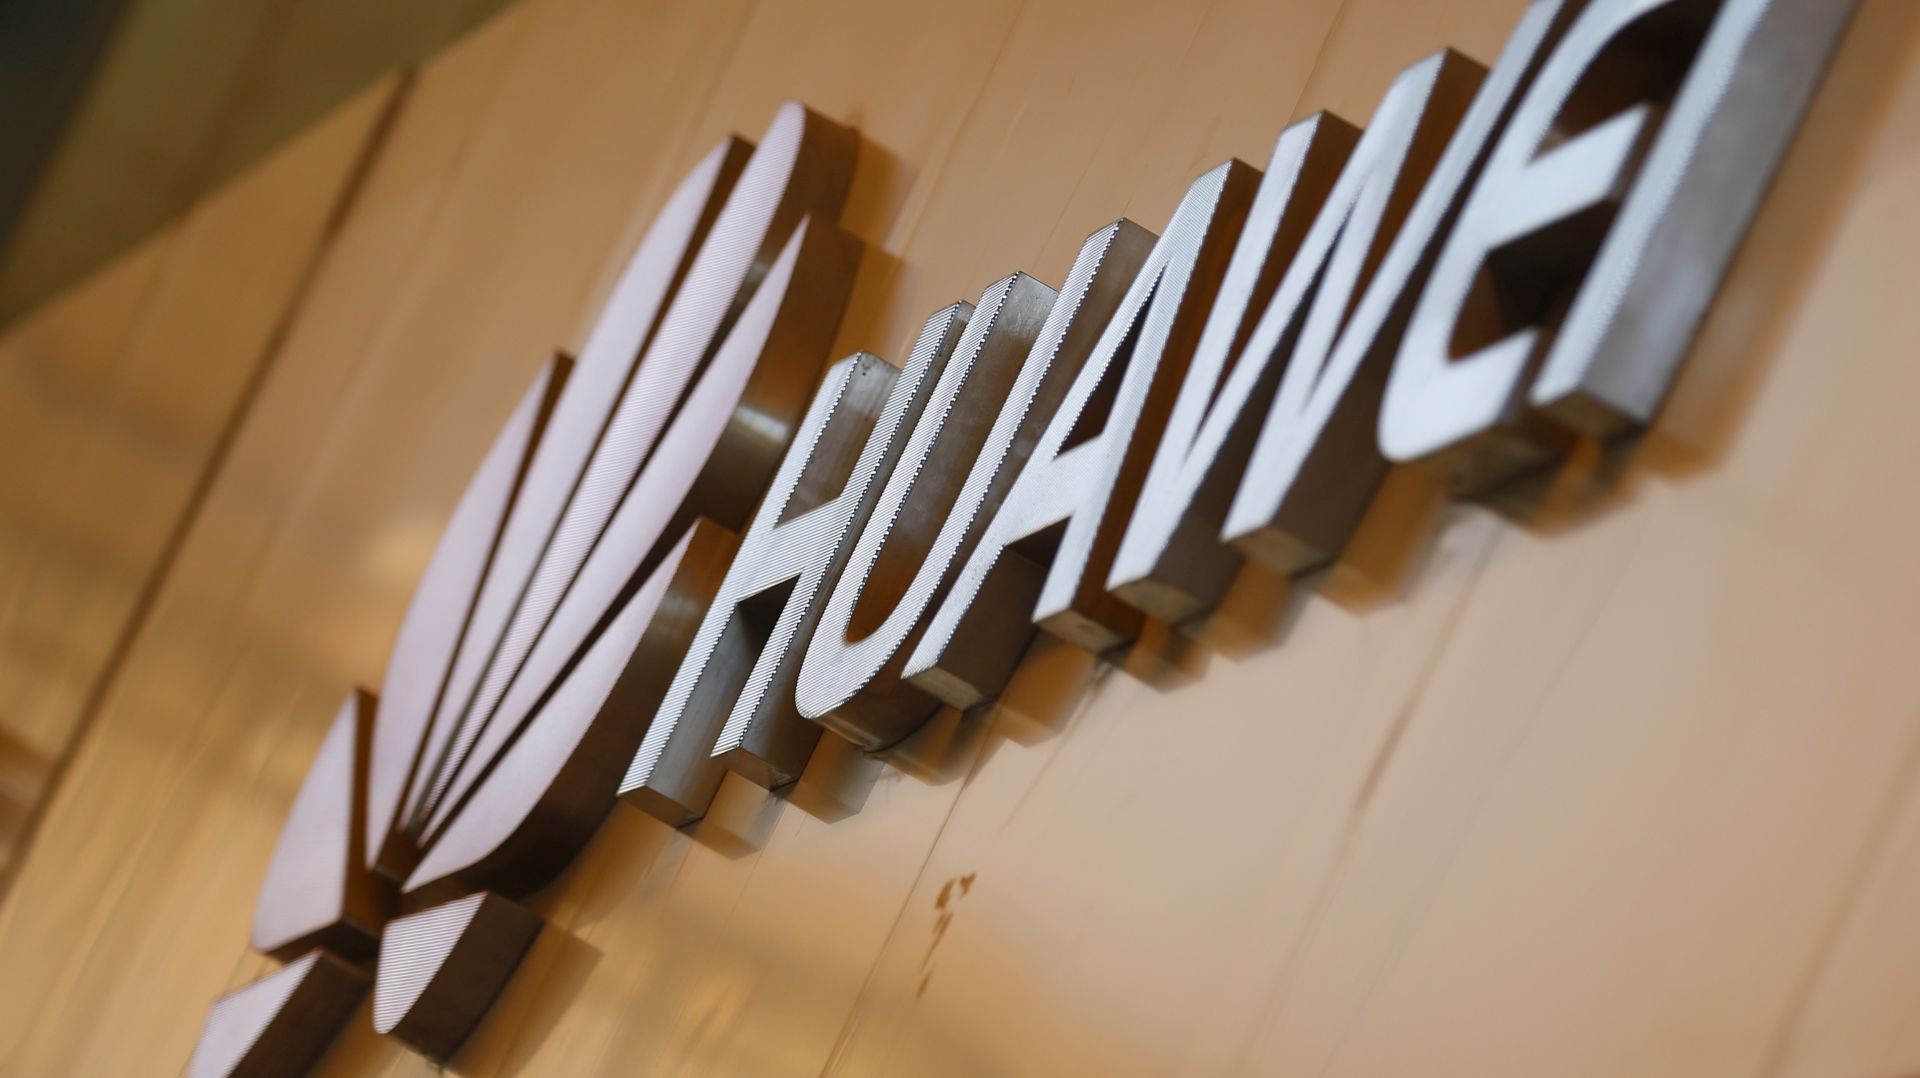 epa07520861 (FILE) - A view shows a Huawei logo on a Huawei store in Beijing, China, 12 December 2018 (reissued 22 April 2019). According to media reports on 22 April, Chinese telecommunications company Huawei reportedly earned 179.7 billion Yuan (26 billion US dollar) in revenue in the first quarter of 2019, a 39 percent year-on-year increase, despite political pressure from the US to block Huawei's efforts to build 5G networks due to espionage allegations.  EPA/WU HONG